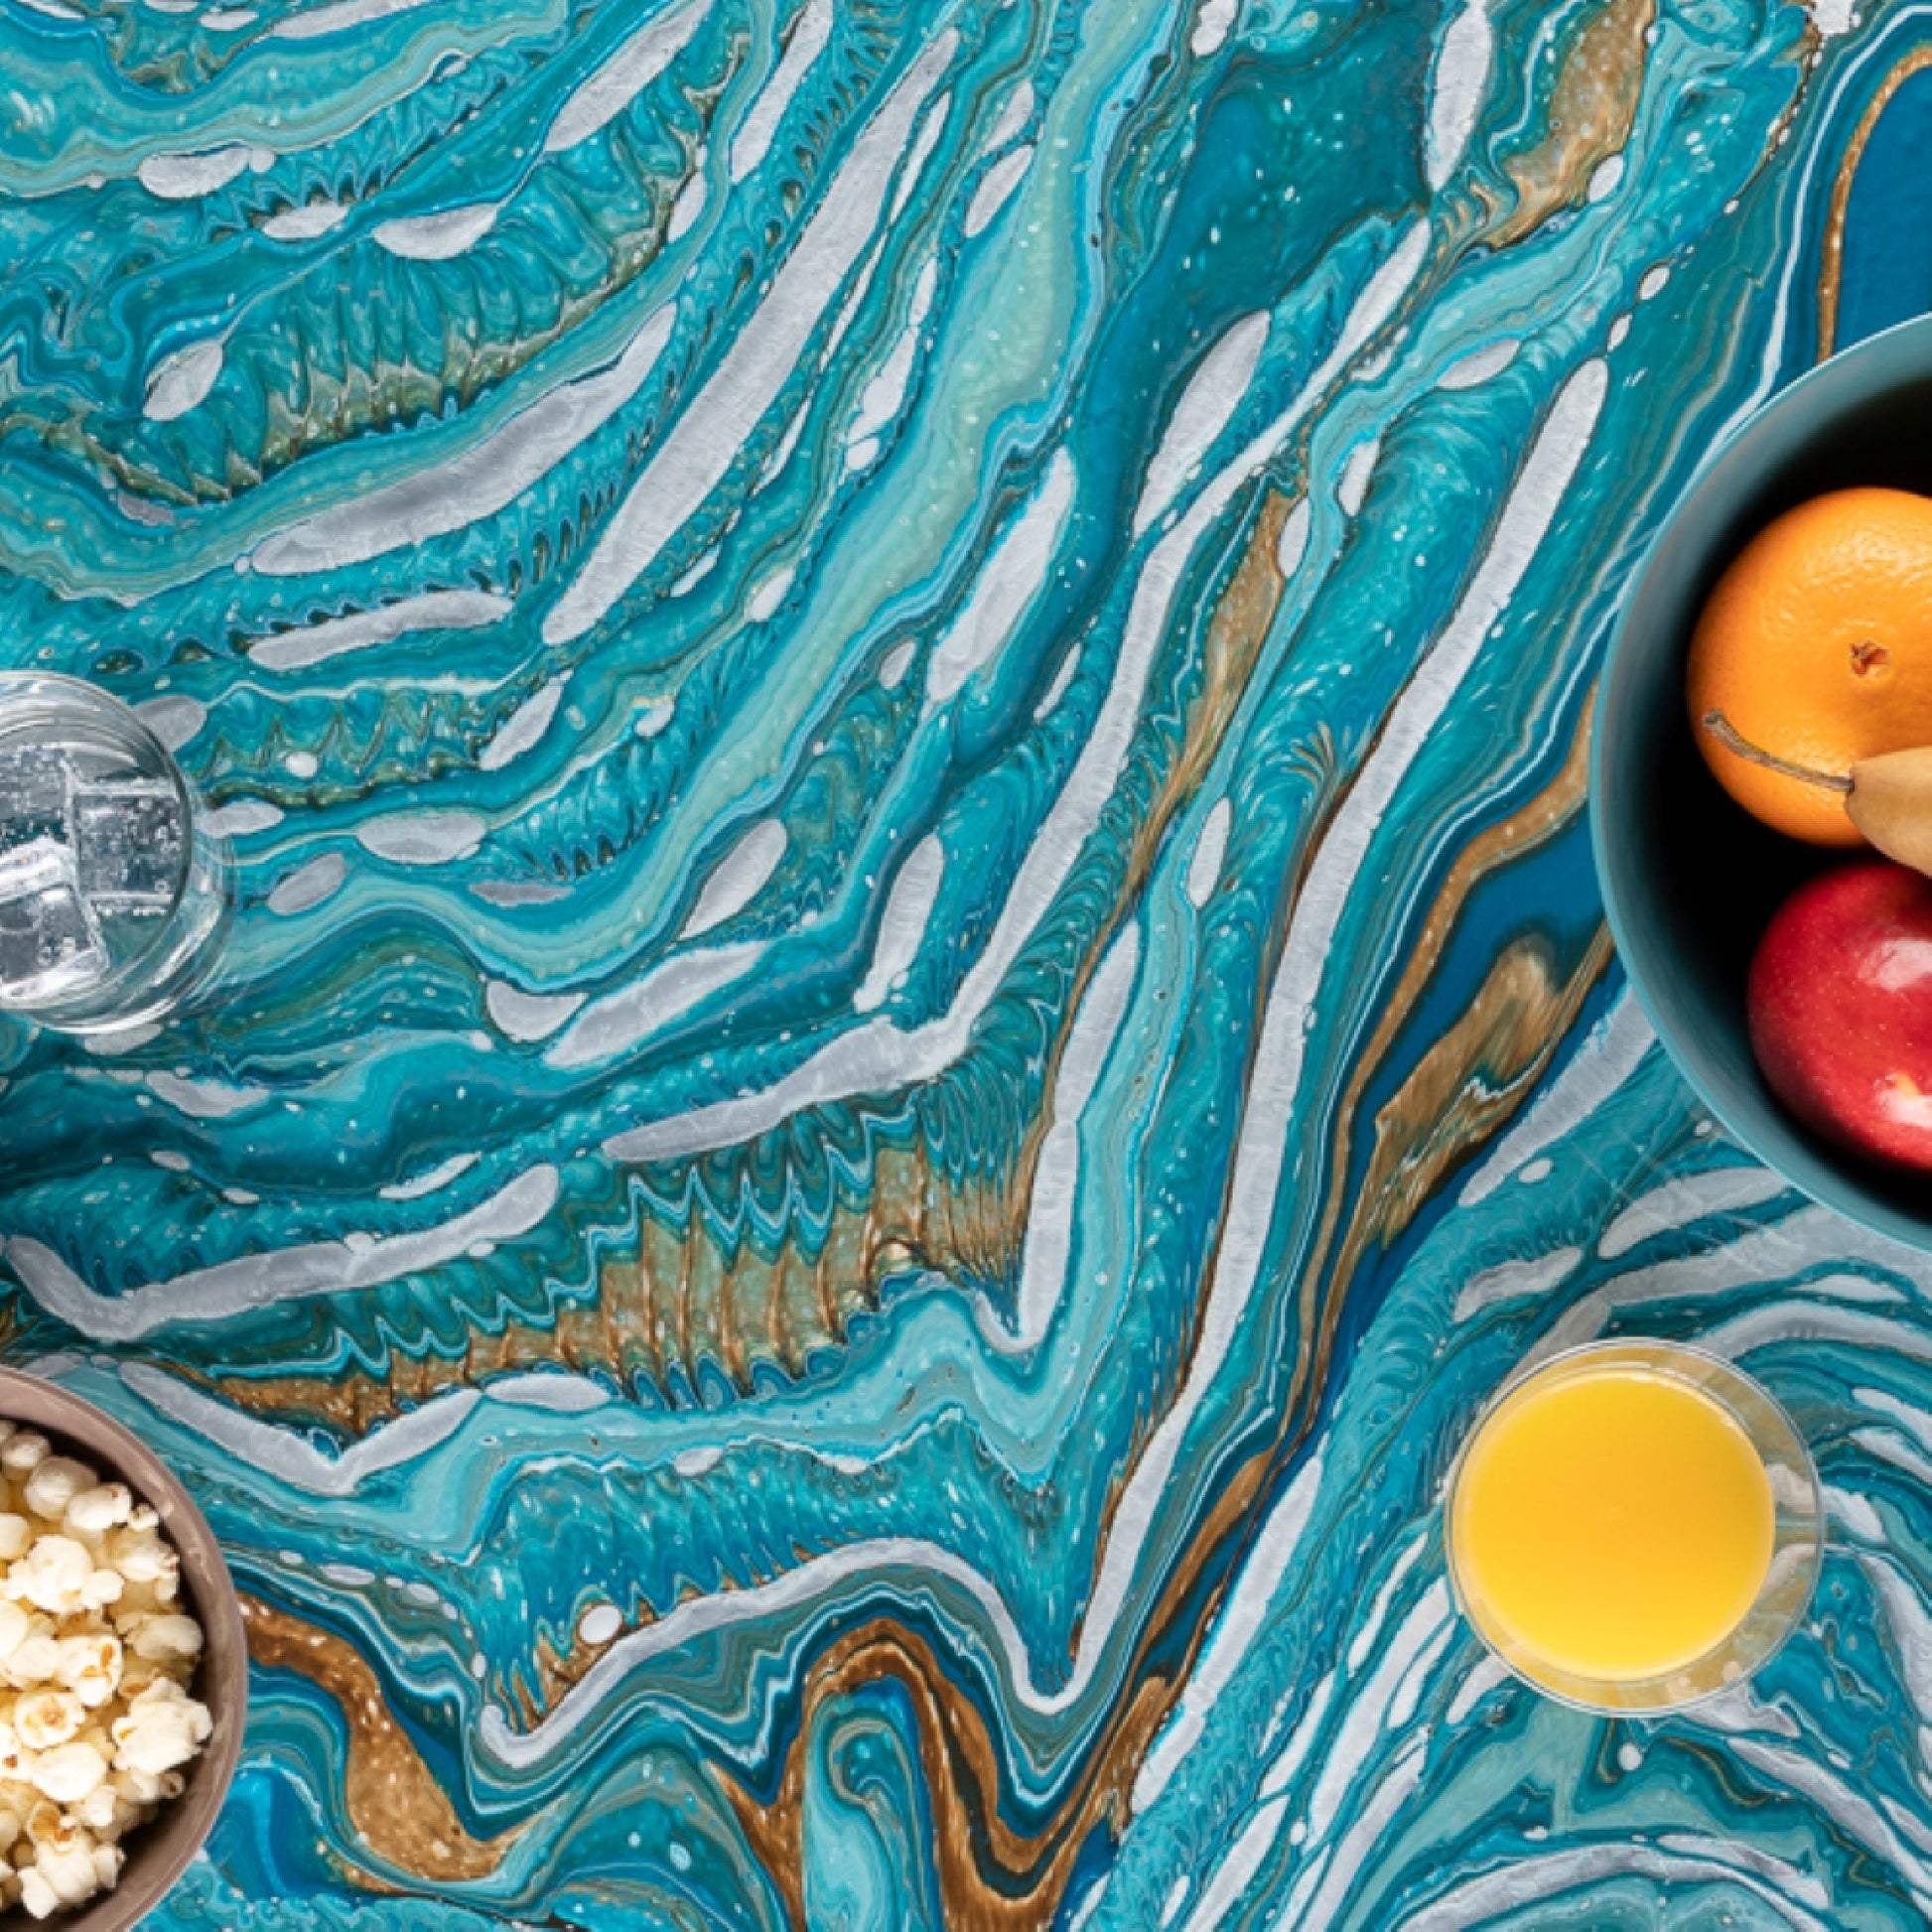 AQUAMARINE-VP Resin Coating - Create Customized Countertops with Ease